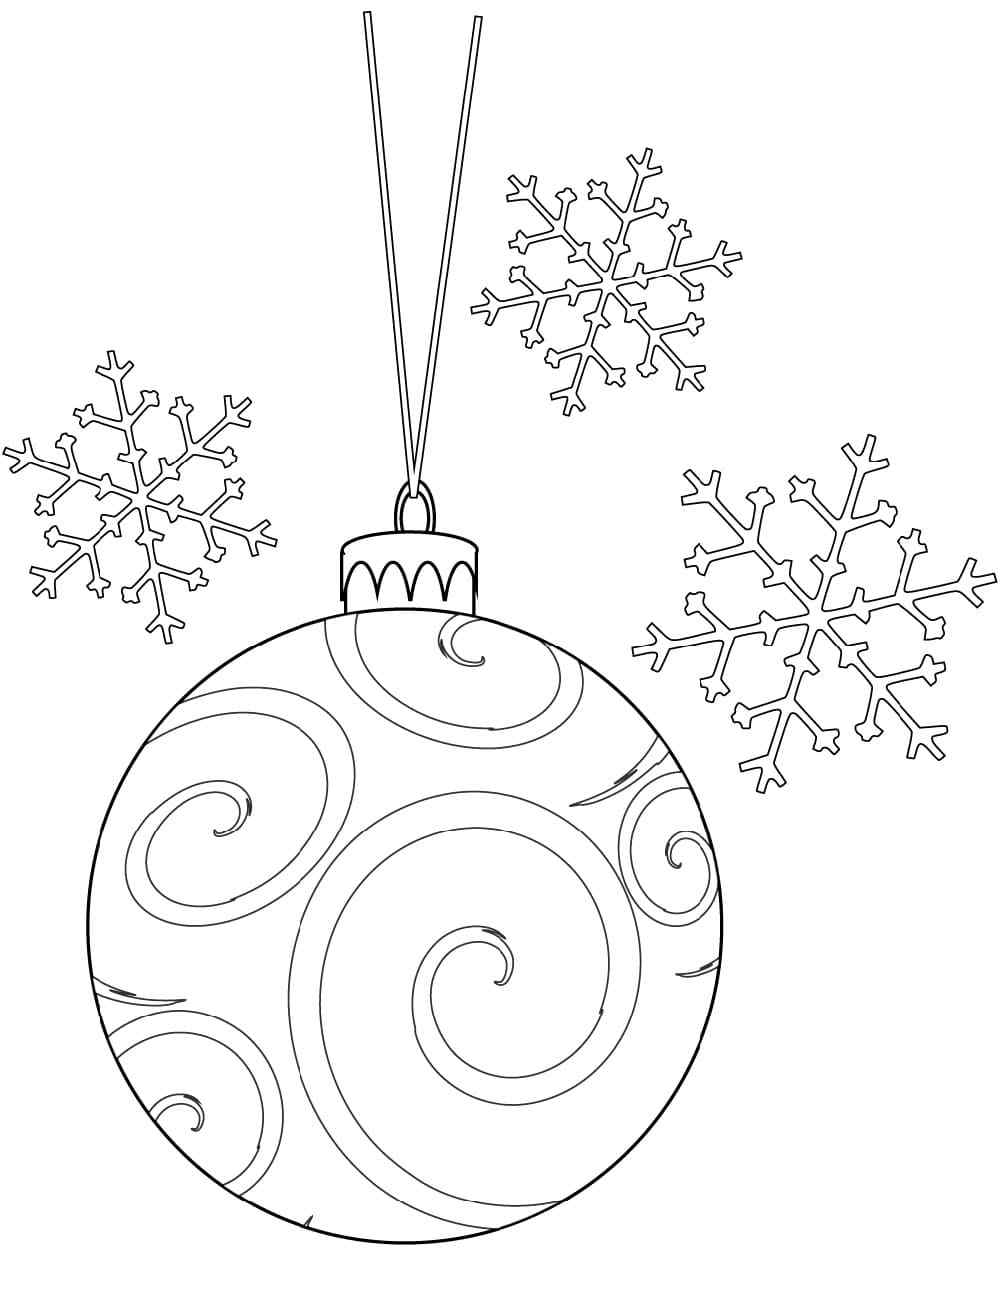 Symbols Of New Year And Christmas Coloring Page